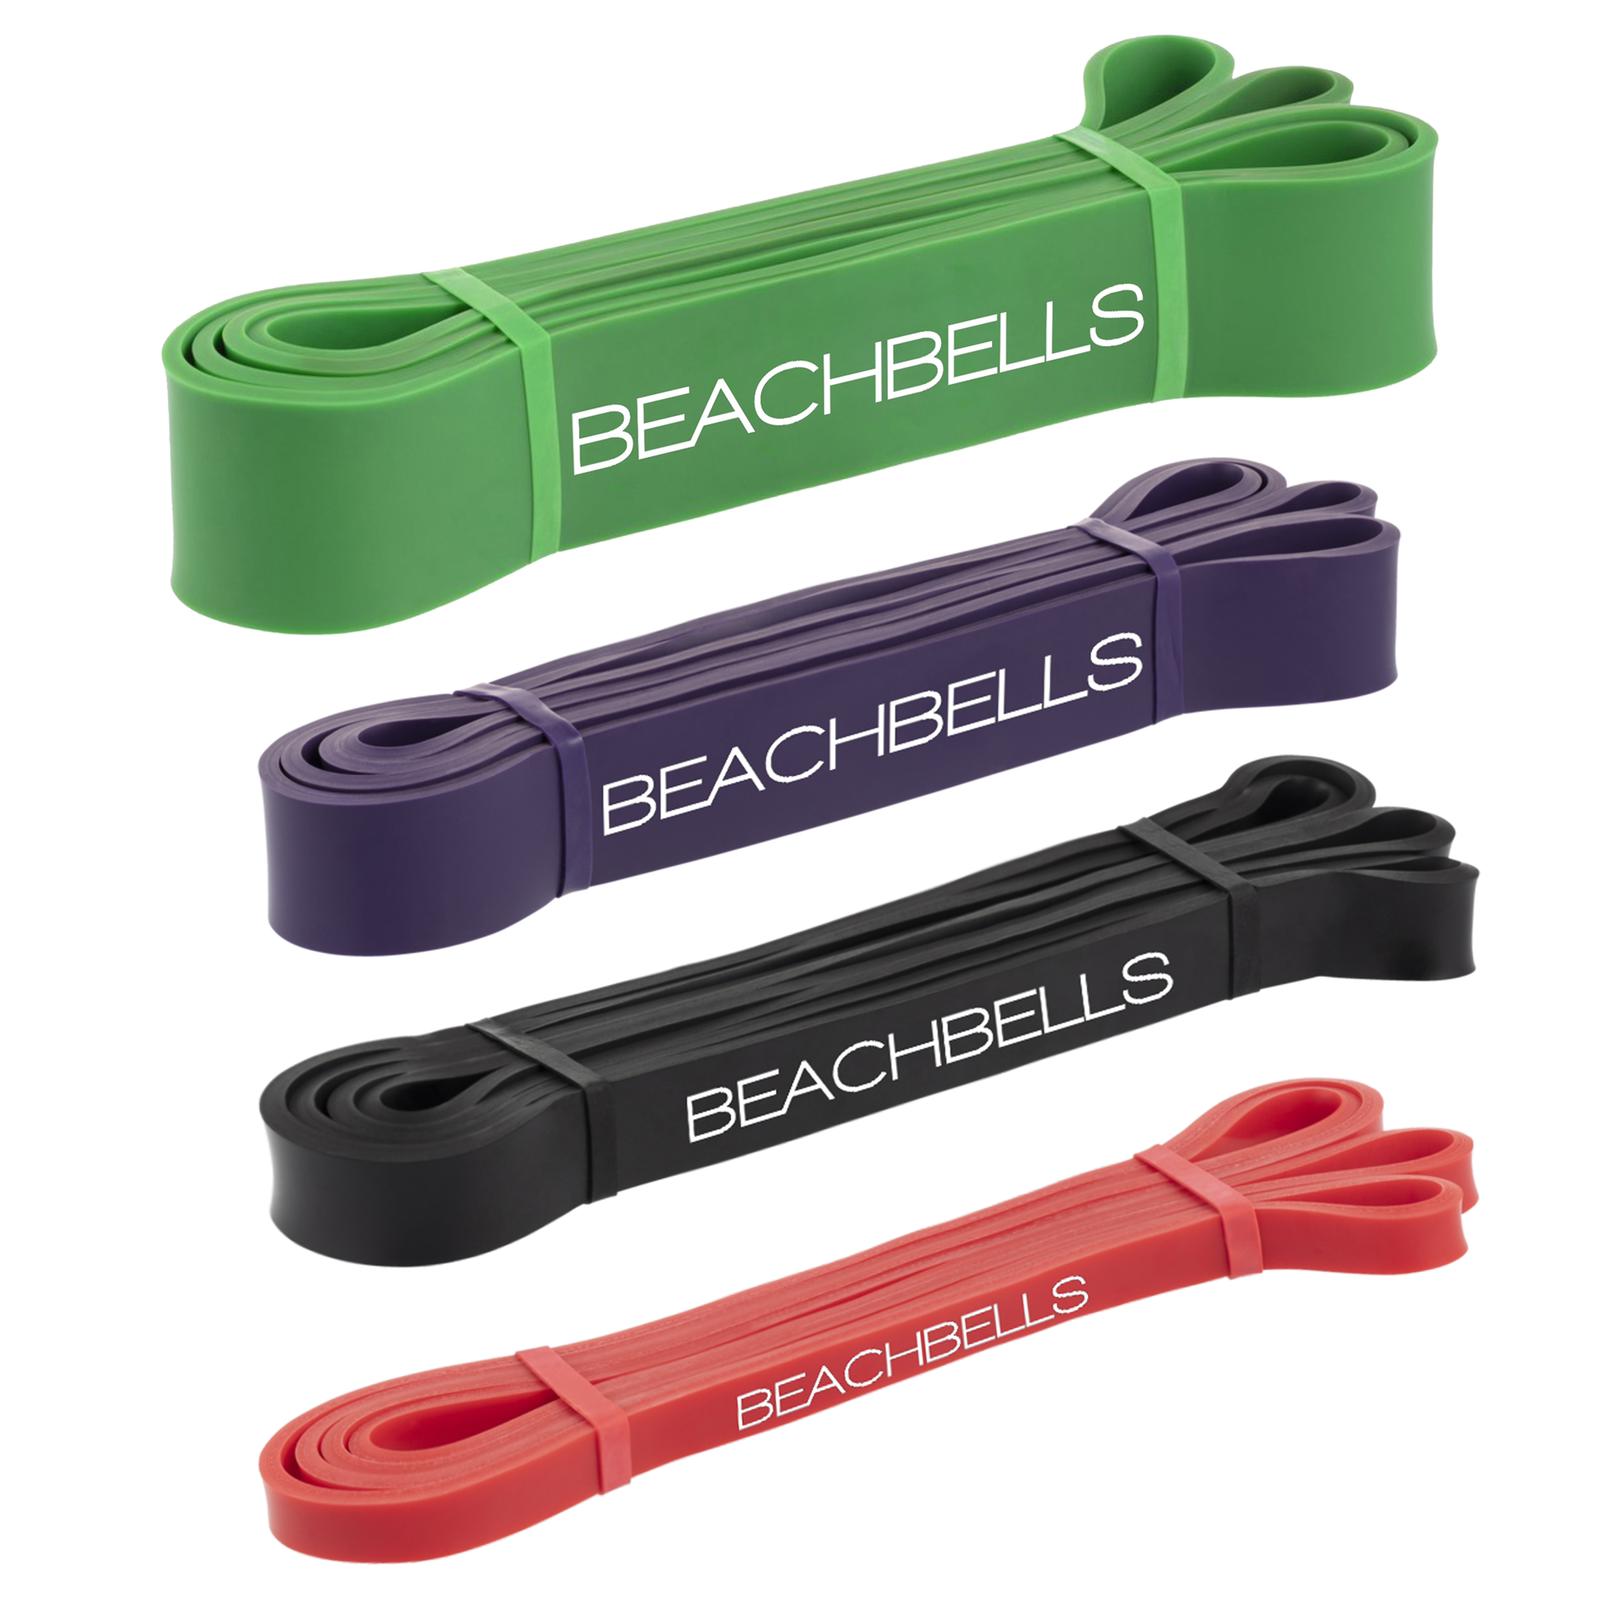 Beachbell Resistance Bands (Set of 4)